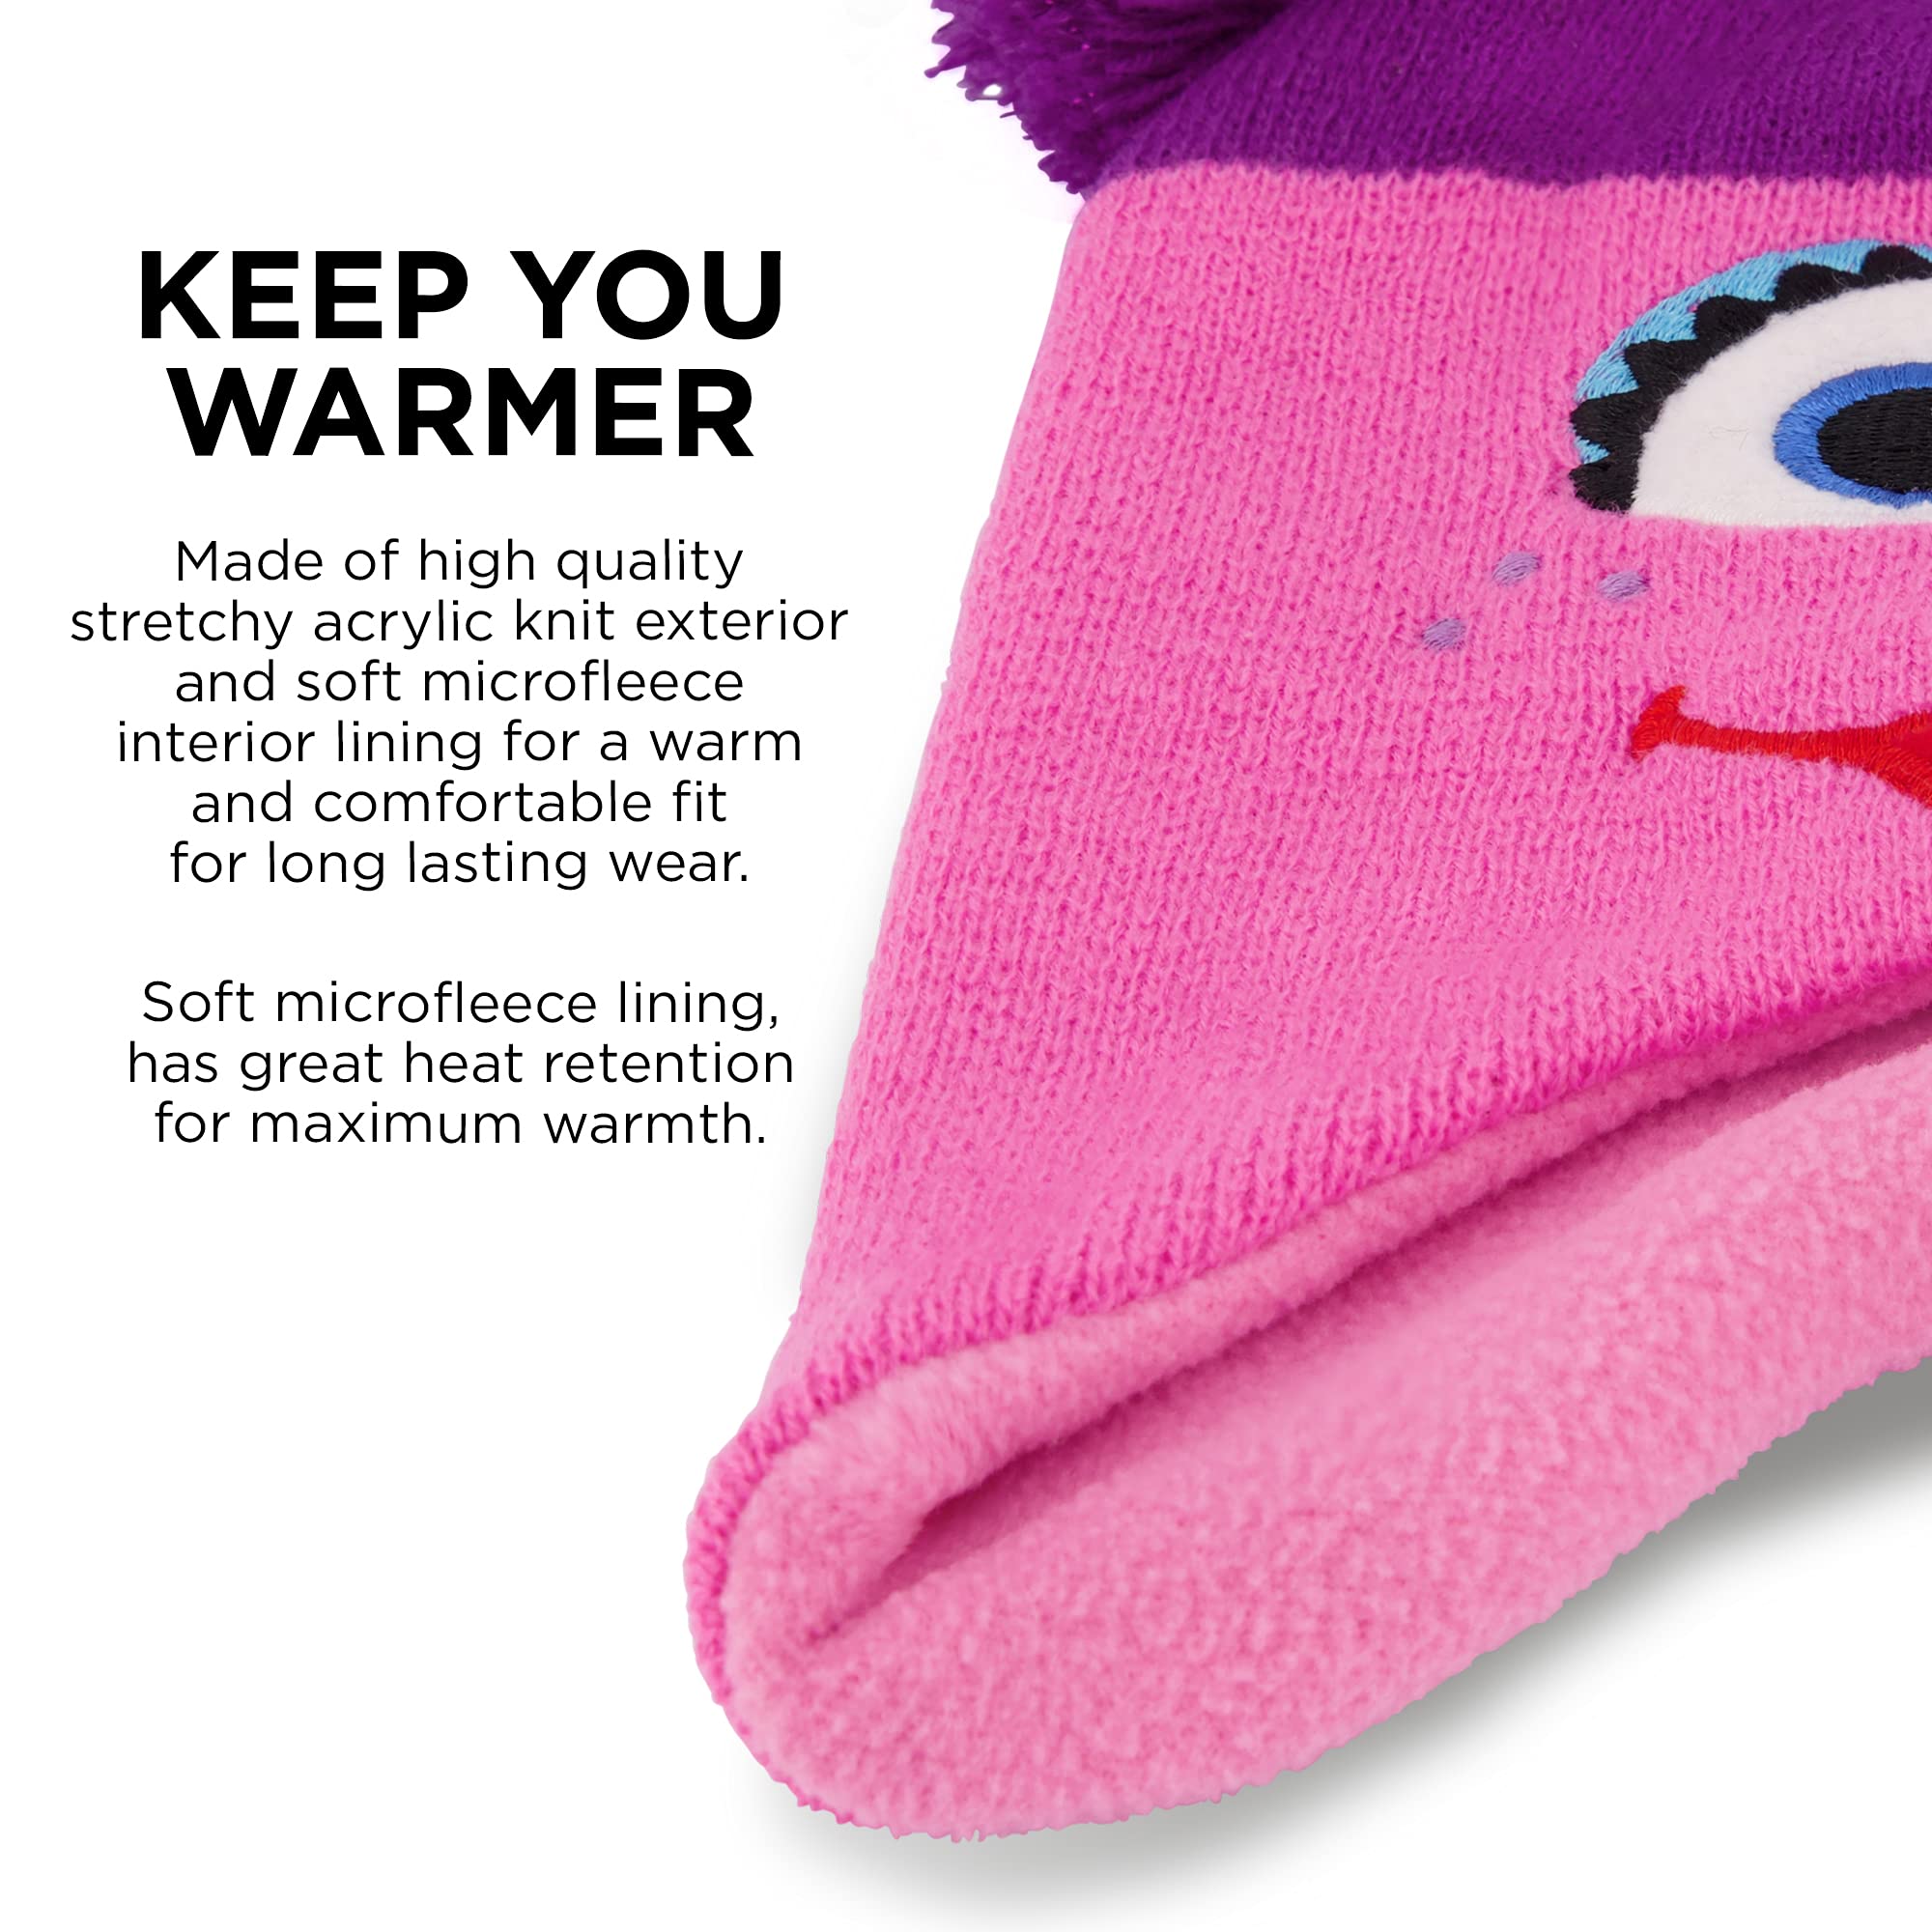 Sesame Street Girls' Winter Hat and Mittens Set, Abby Cadabby Beanie for Ages 2-4, Dark Pink